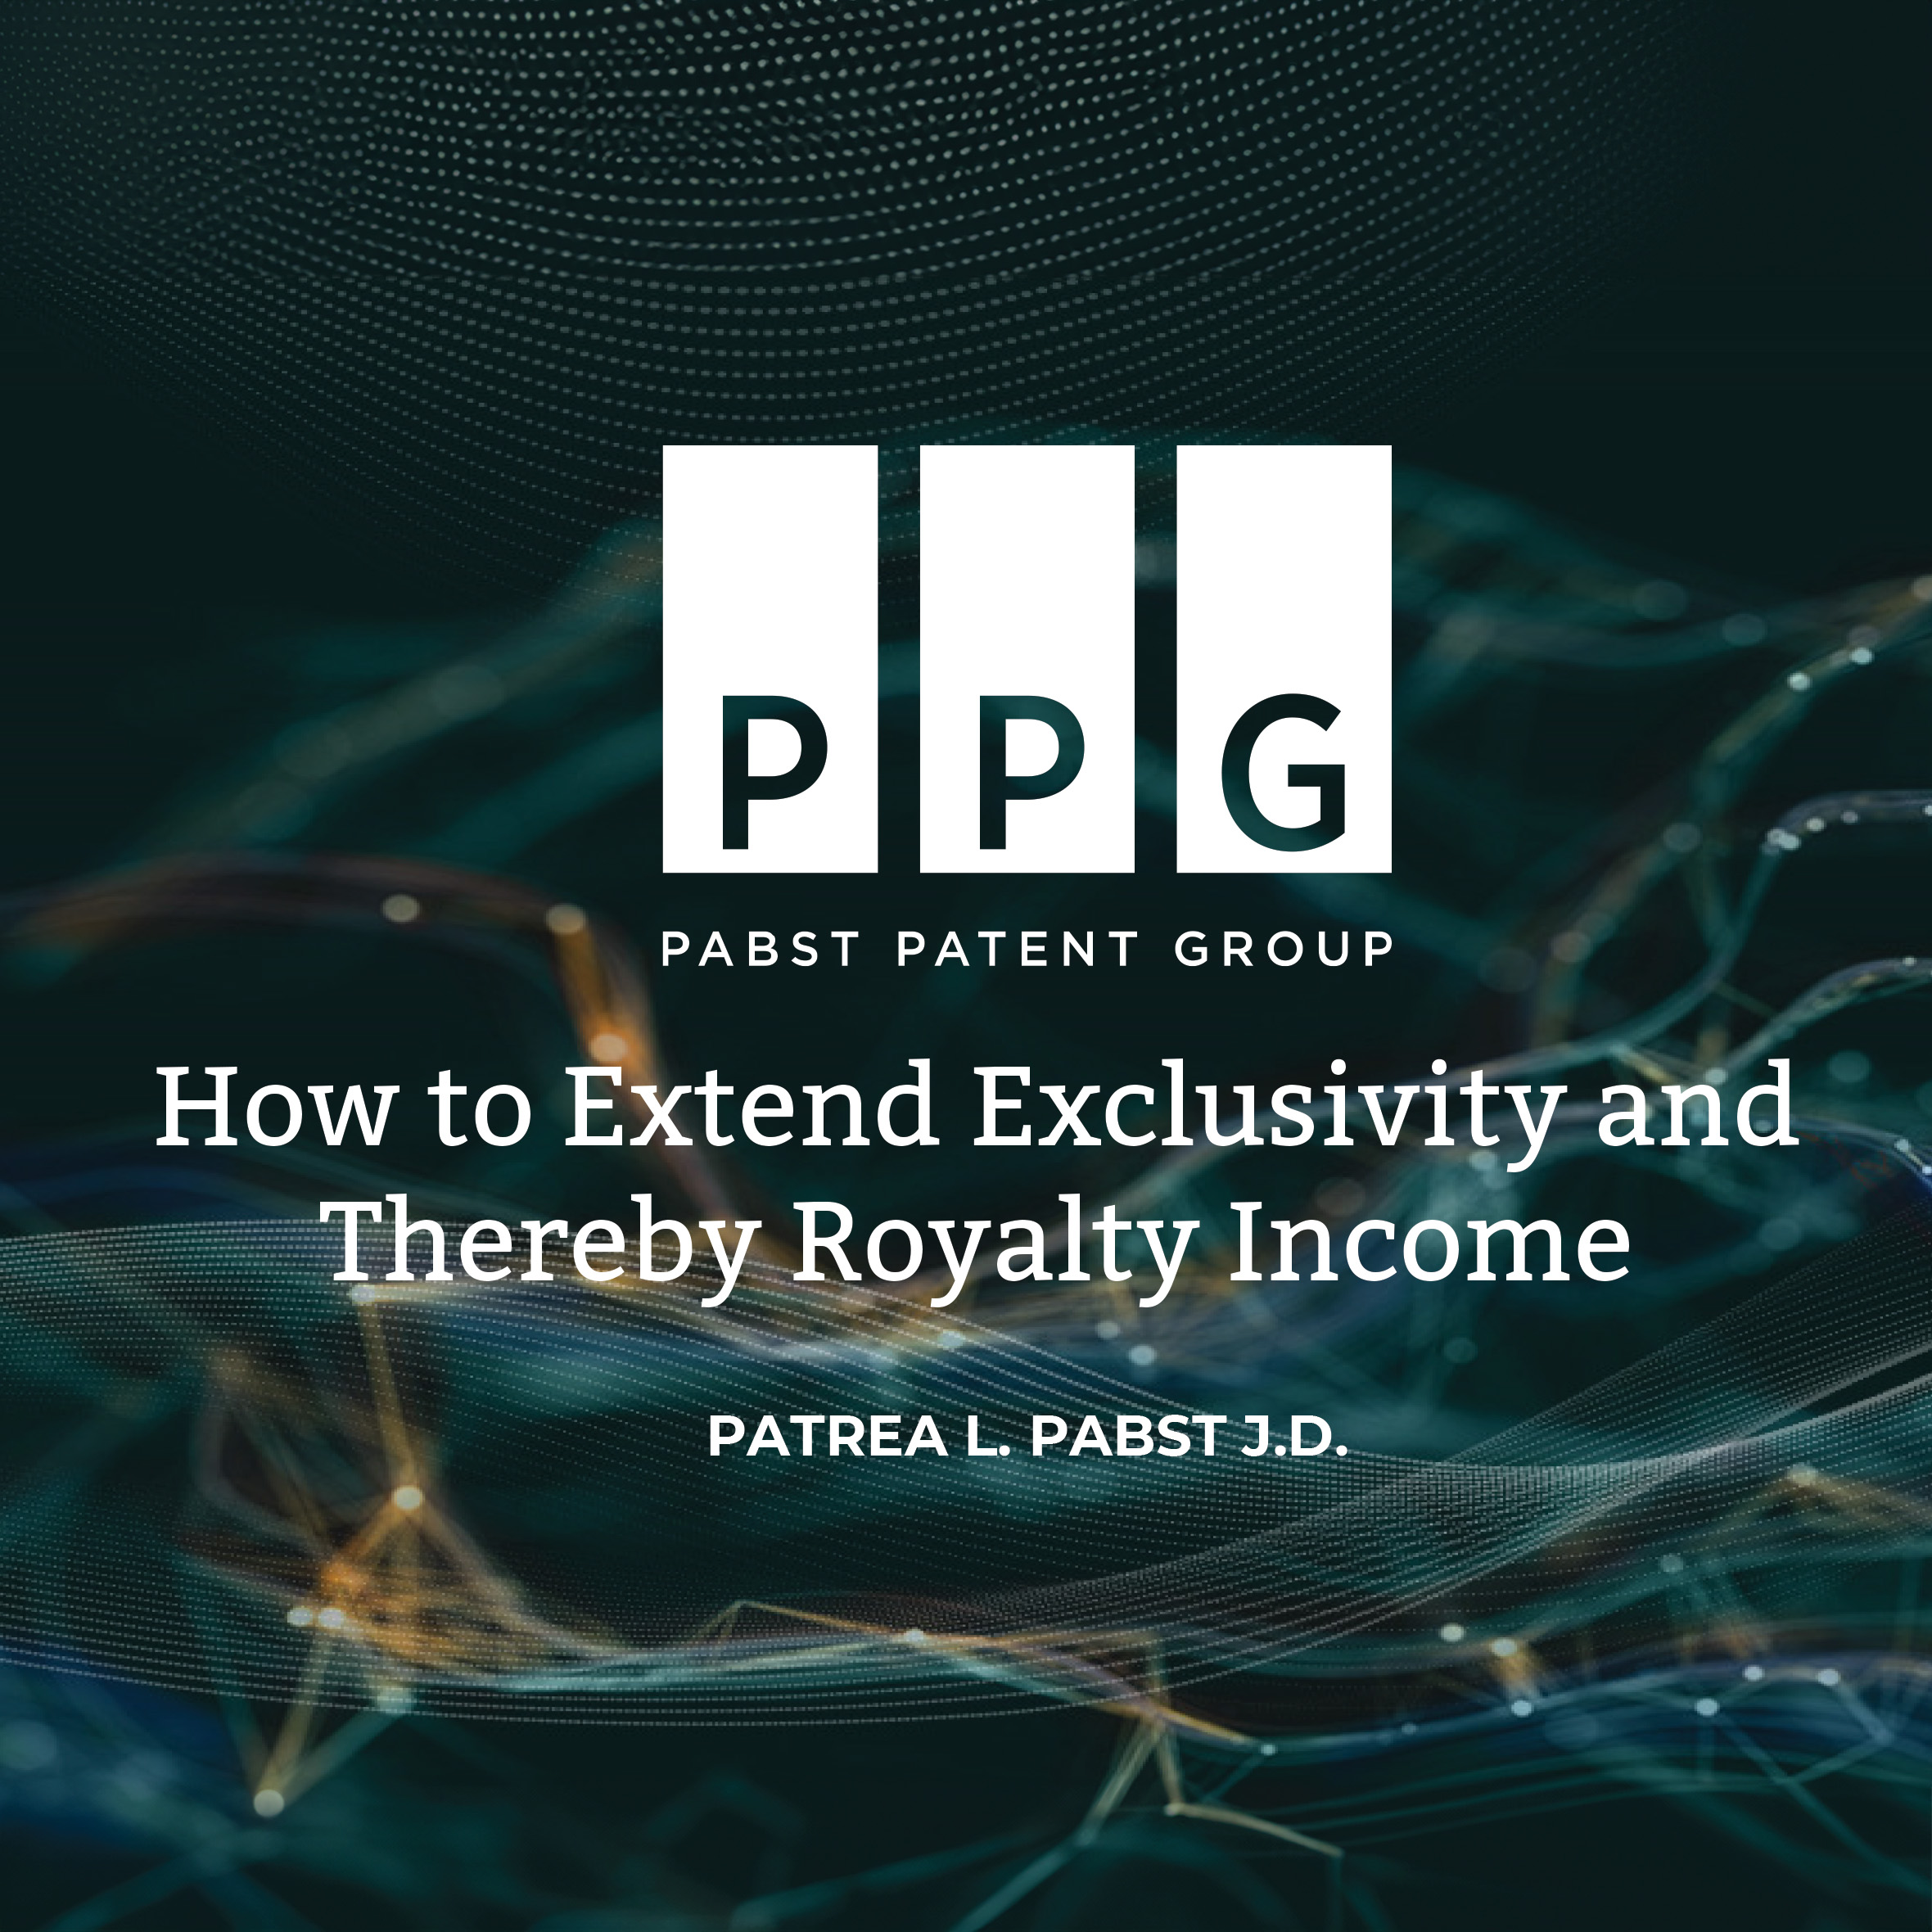 How to Extend Exclusivity and Thereby Royalty Income